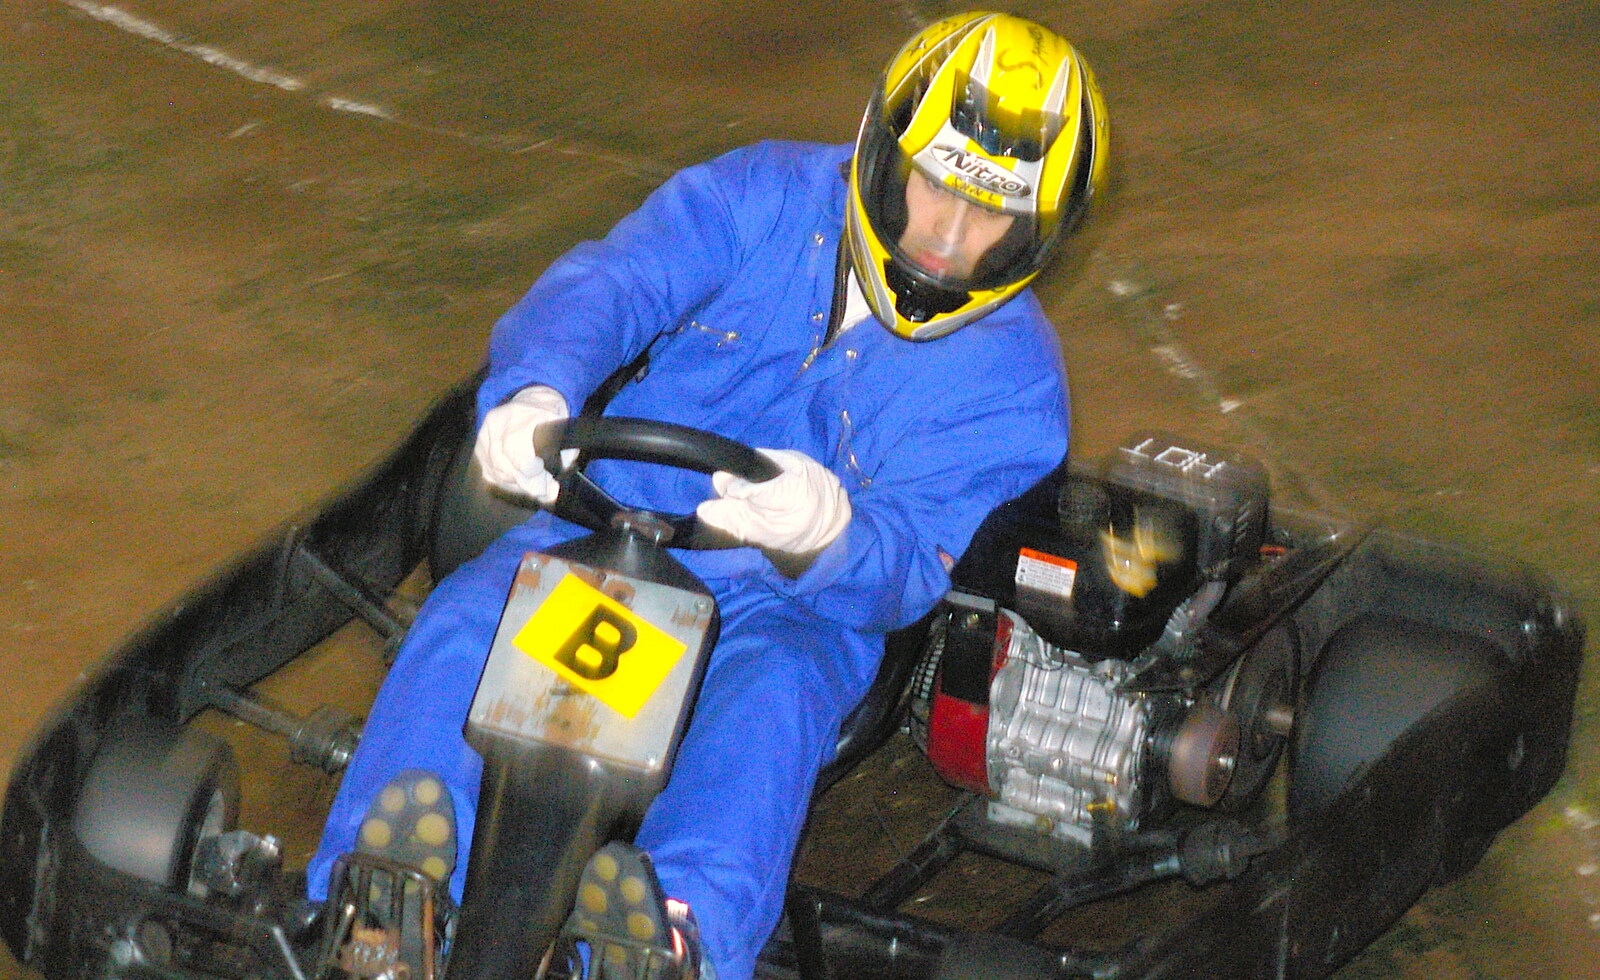 Petay races from Qualcomm goes Karting in Caxton, Cambridgeshire - 7th November 2005